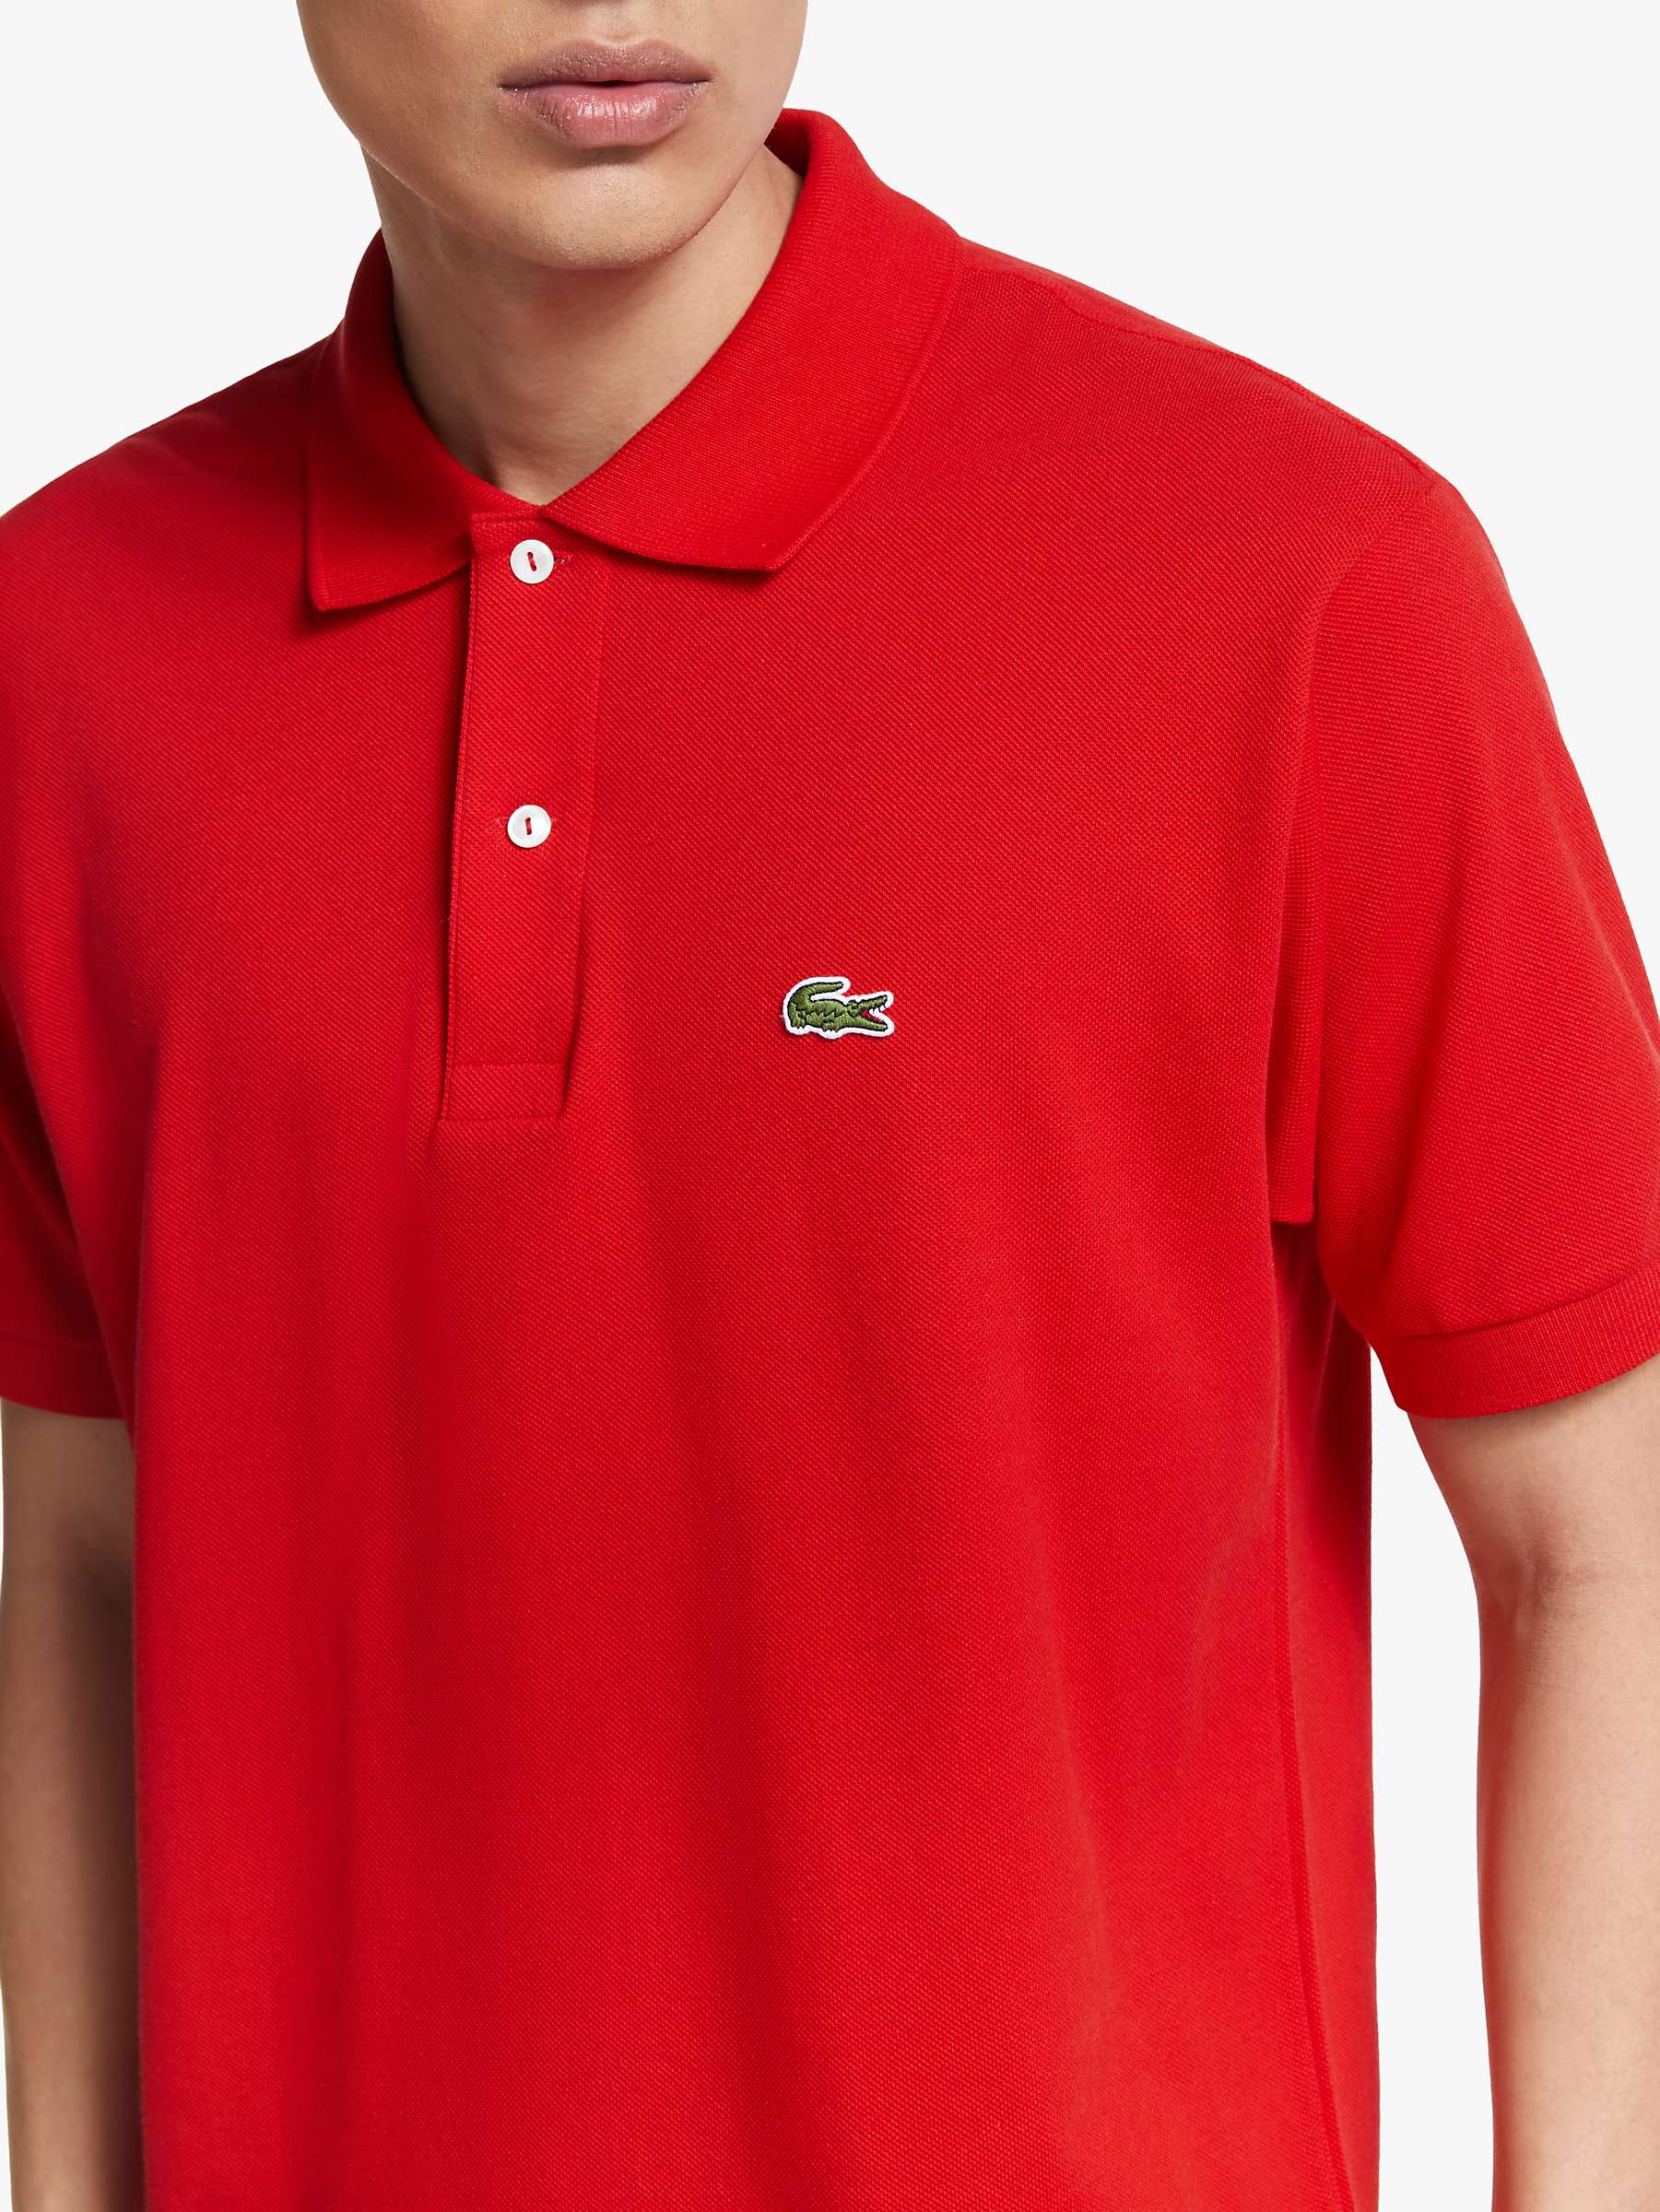 Buy Lacoste L.12.12 Classic Regular Fit Short Sleeve Polo Shirt Online at johnlewis.com